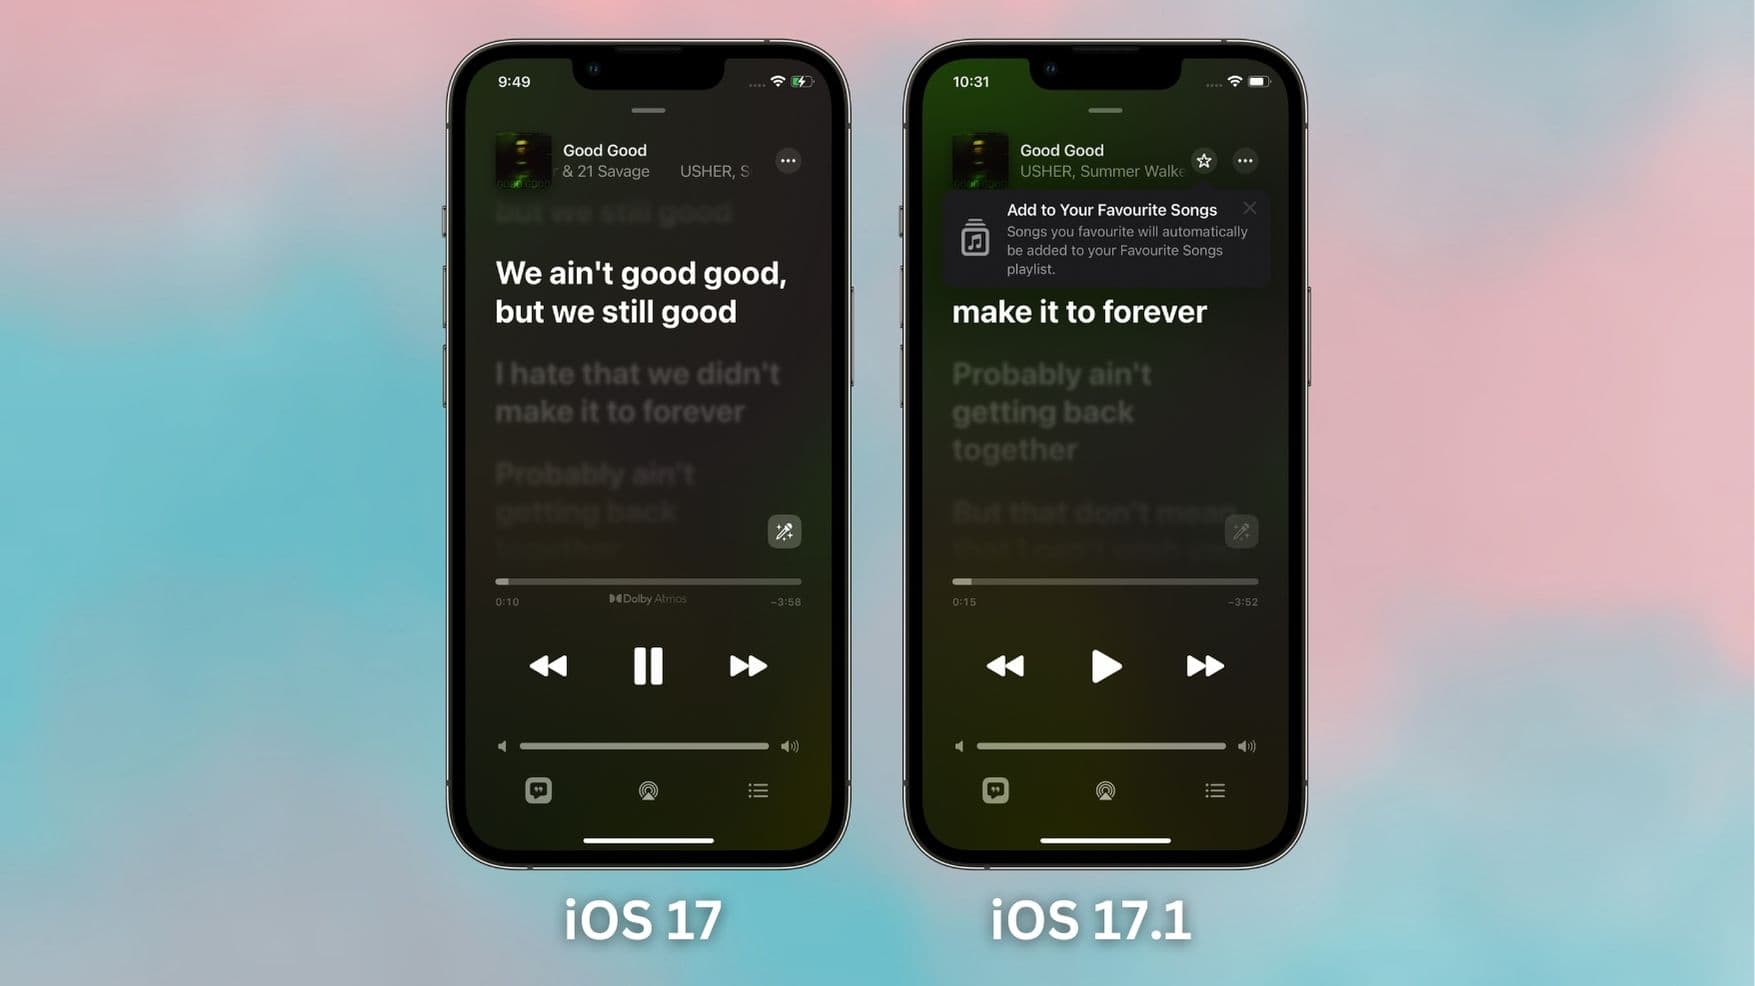 It is now easier than ever to favorite songs in Apple Music on iOS 17.1.